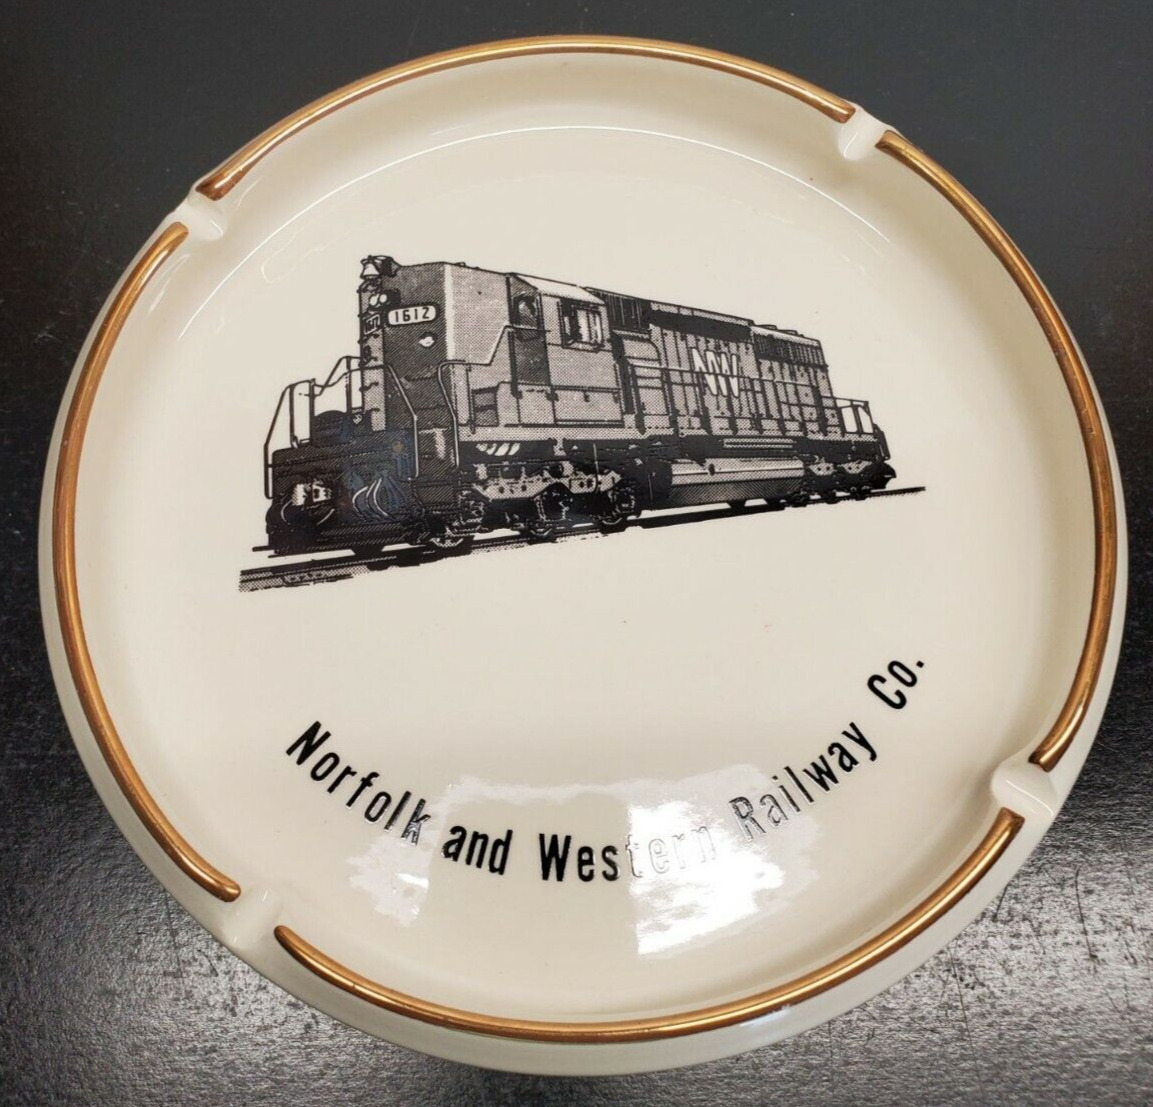 Norfolk and Western Railway Co. Ashtray -Appears to be  Never Used - Vintage